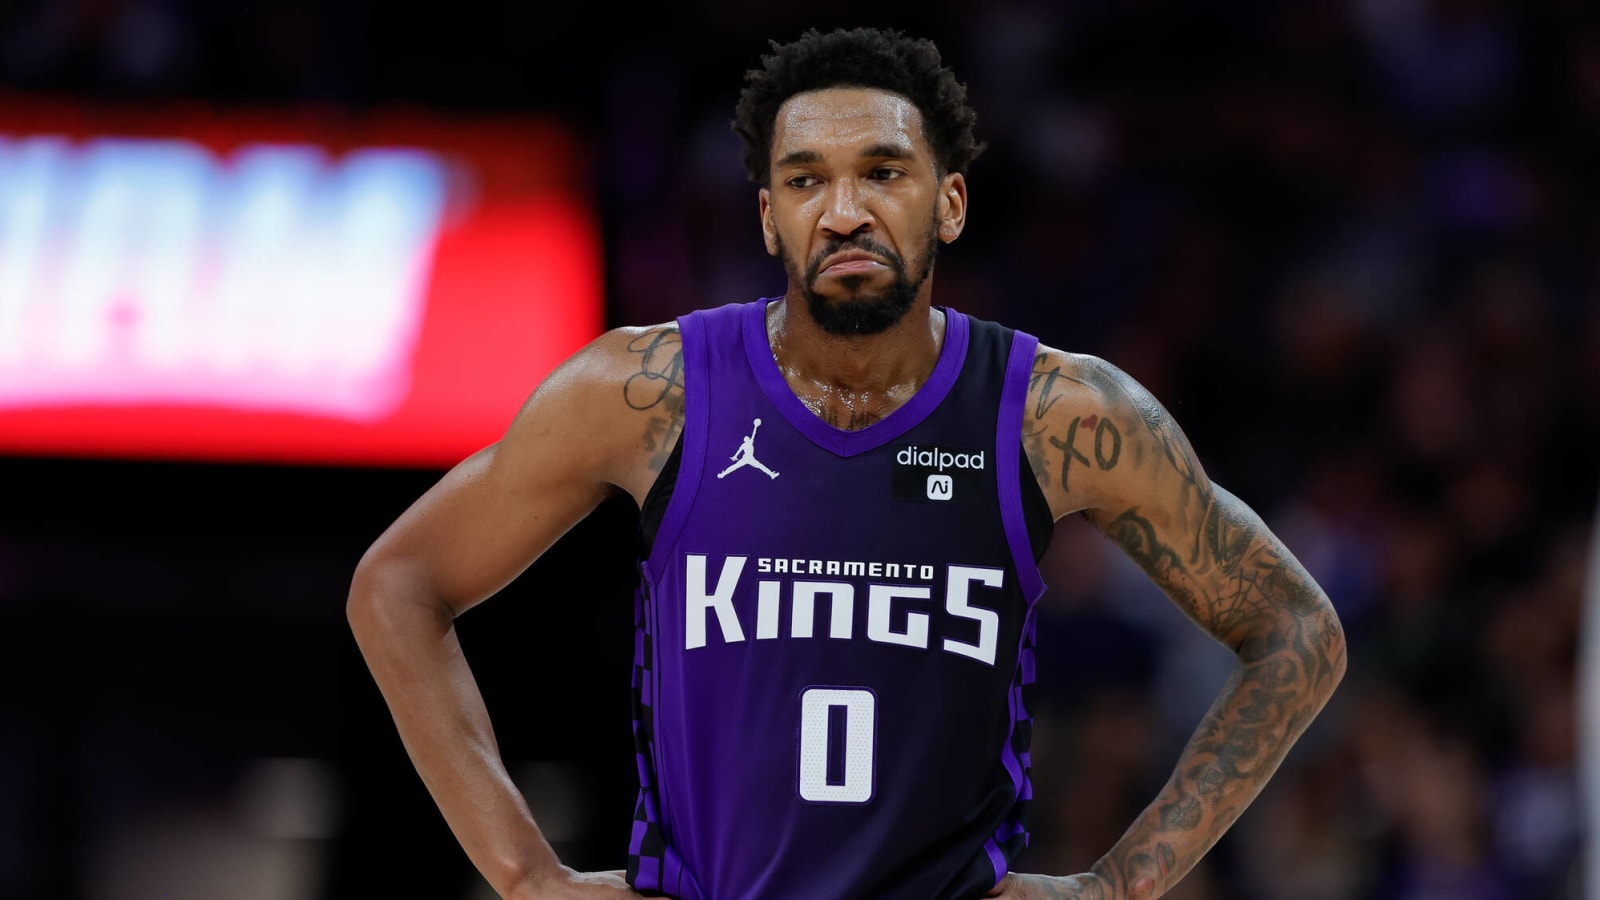 Key Kings guard likely out through end of regular season